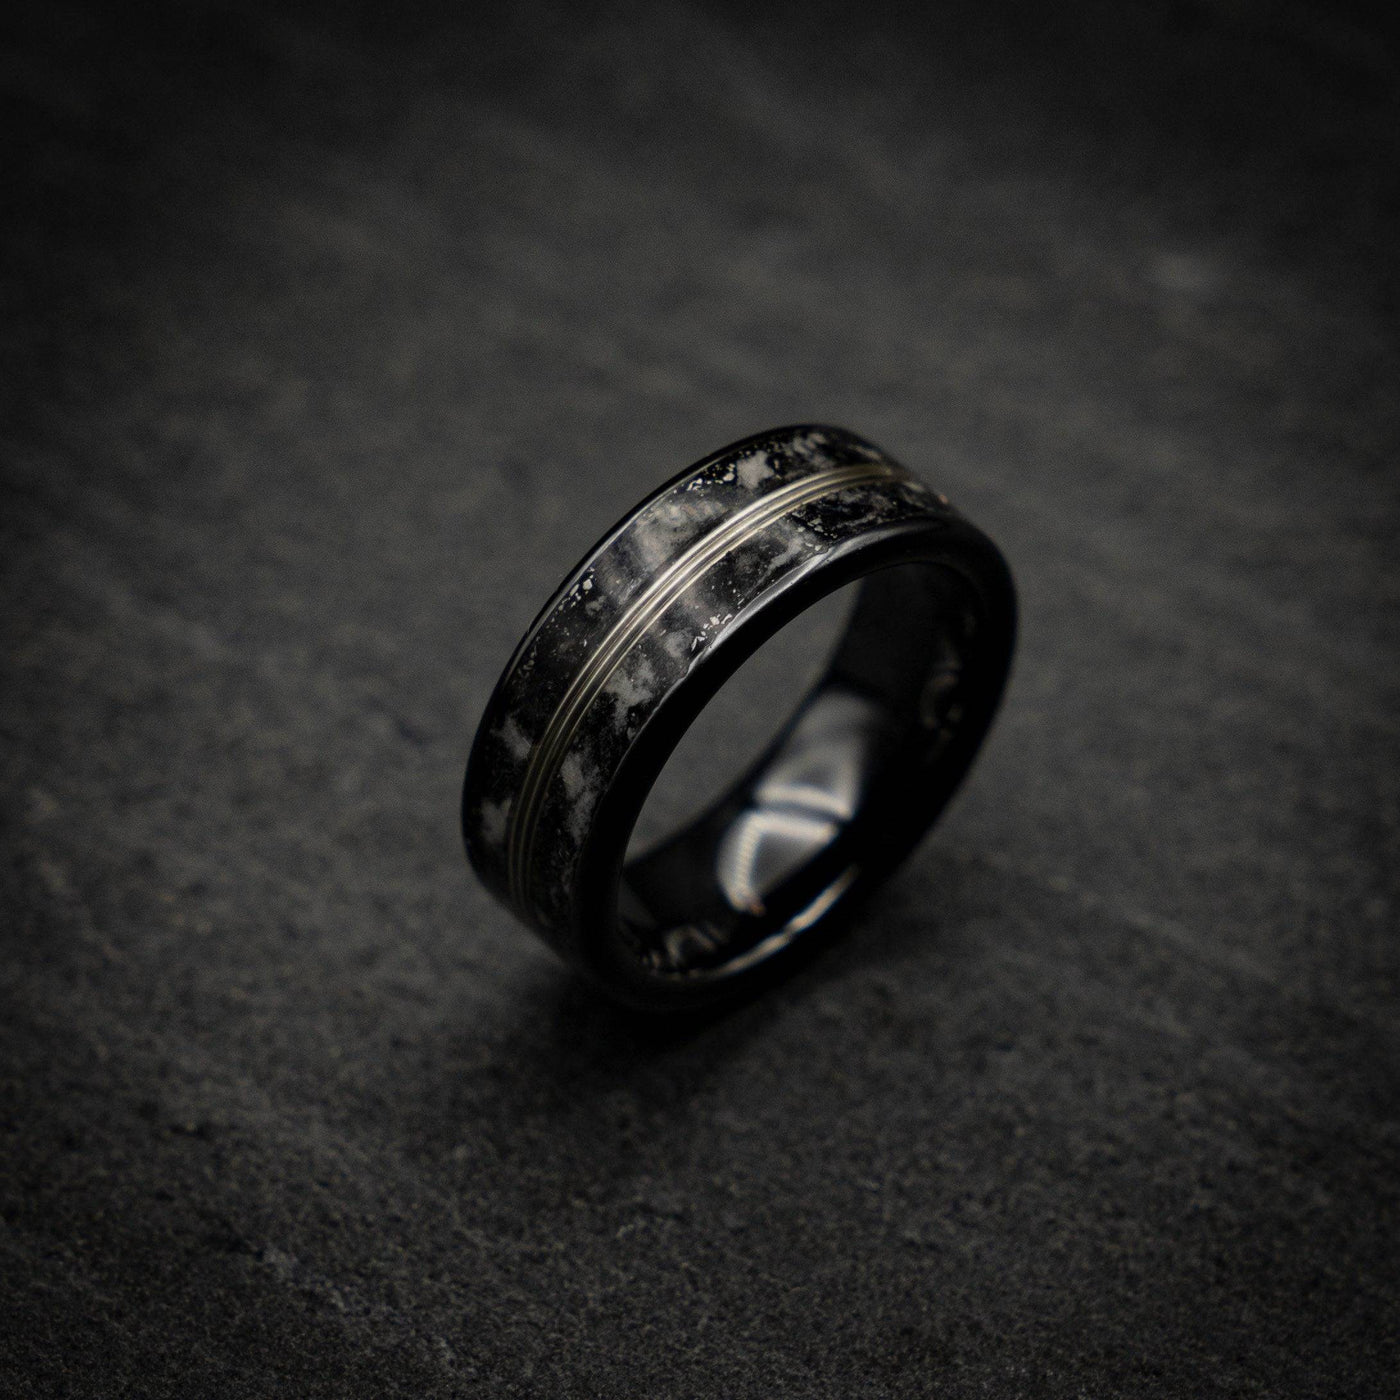 Glow in the Dark Meteorite Ring White Gold Wire Inlay